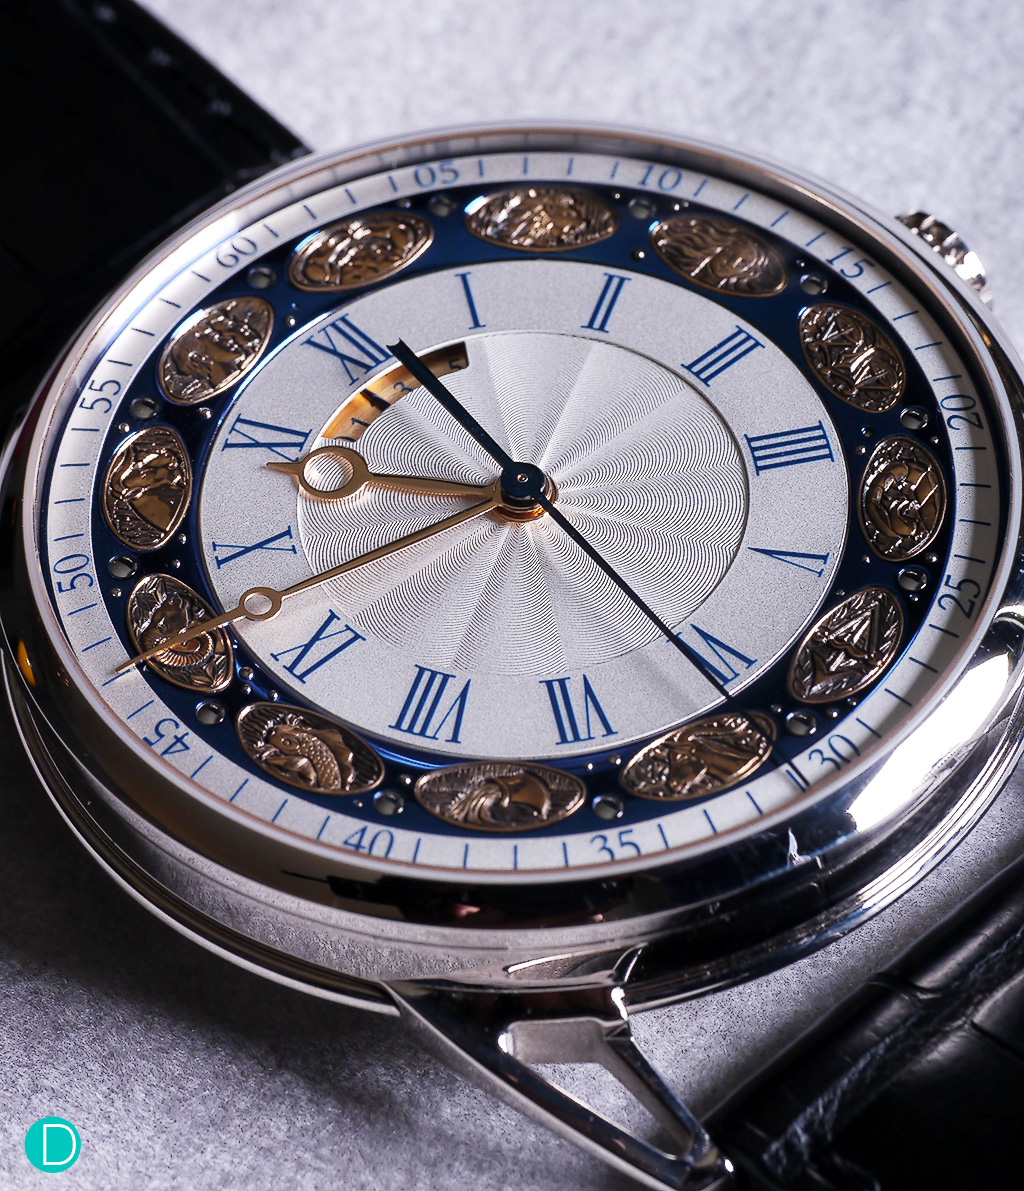 De Bethune DB25T Zodiac. The watch indicates the time in hours, minutes and seconds. And features a rather special applique on the dial representing the 12 zodiac signs. 